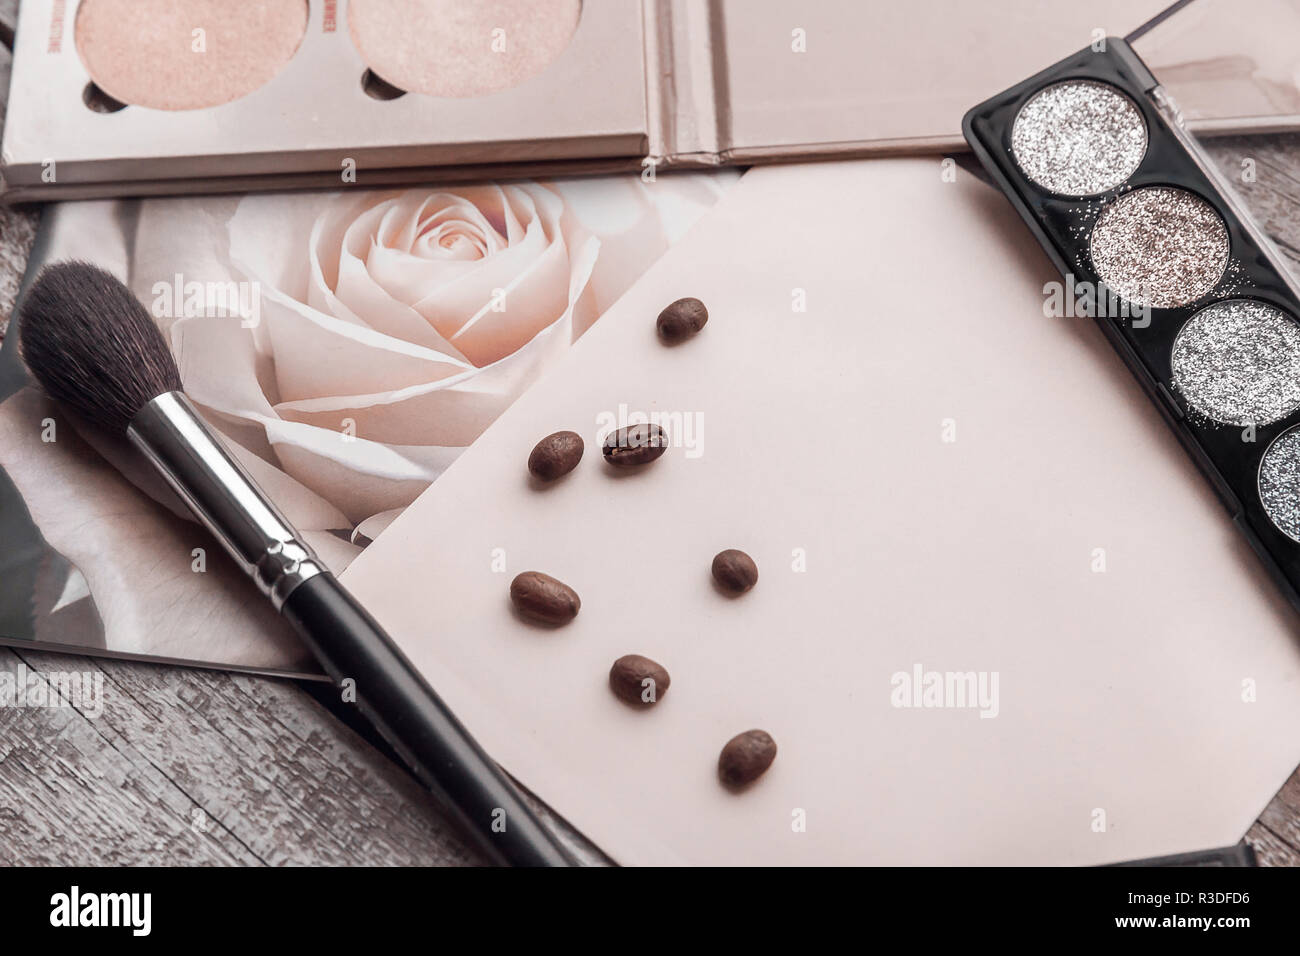 Image of cosmetic make up flat lay pink background copy space text beauty graphic content Stock Photo